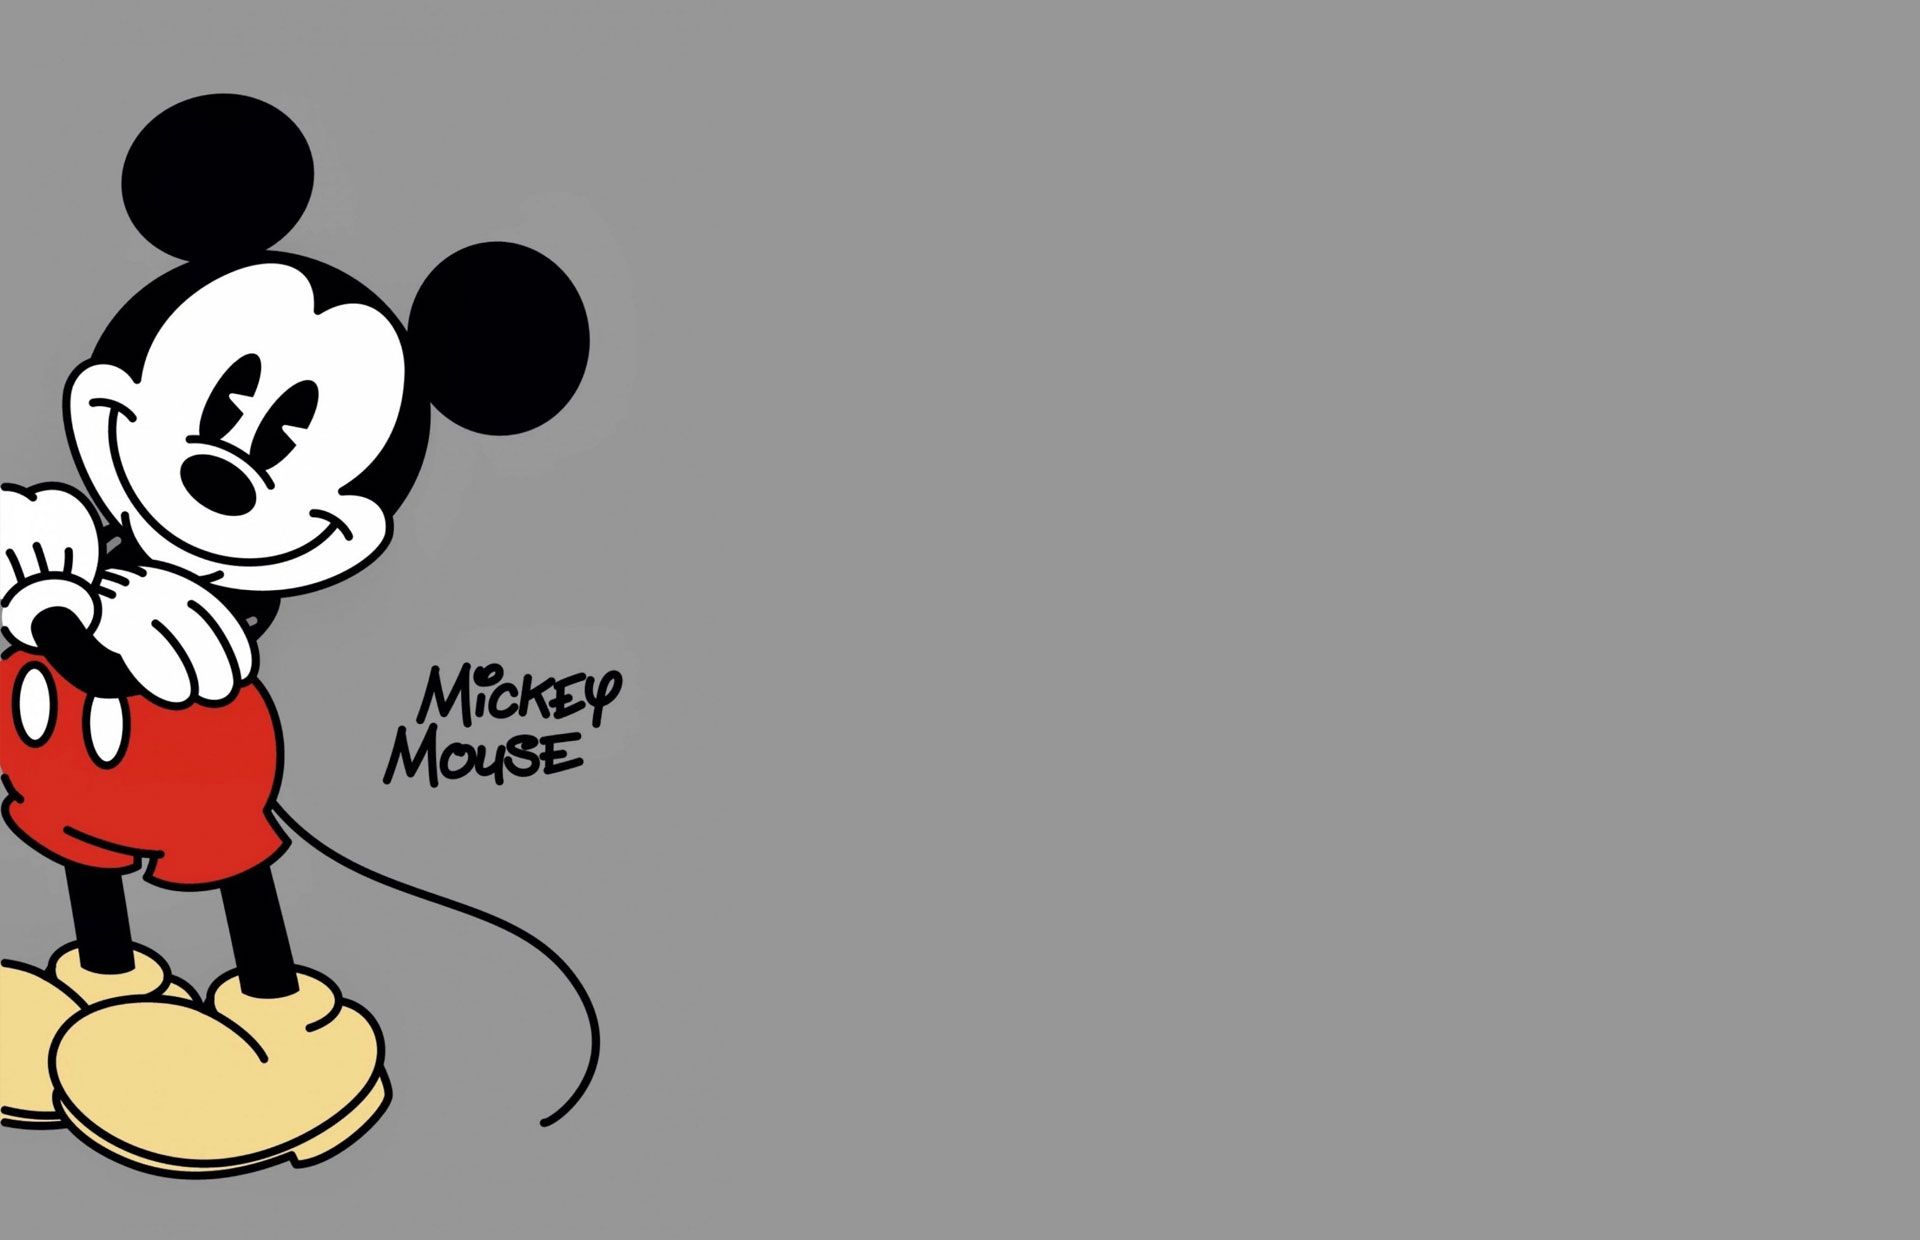 Mickey Mouse Wallpaper For Laptop : Grey Background Wallpaper